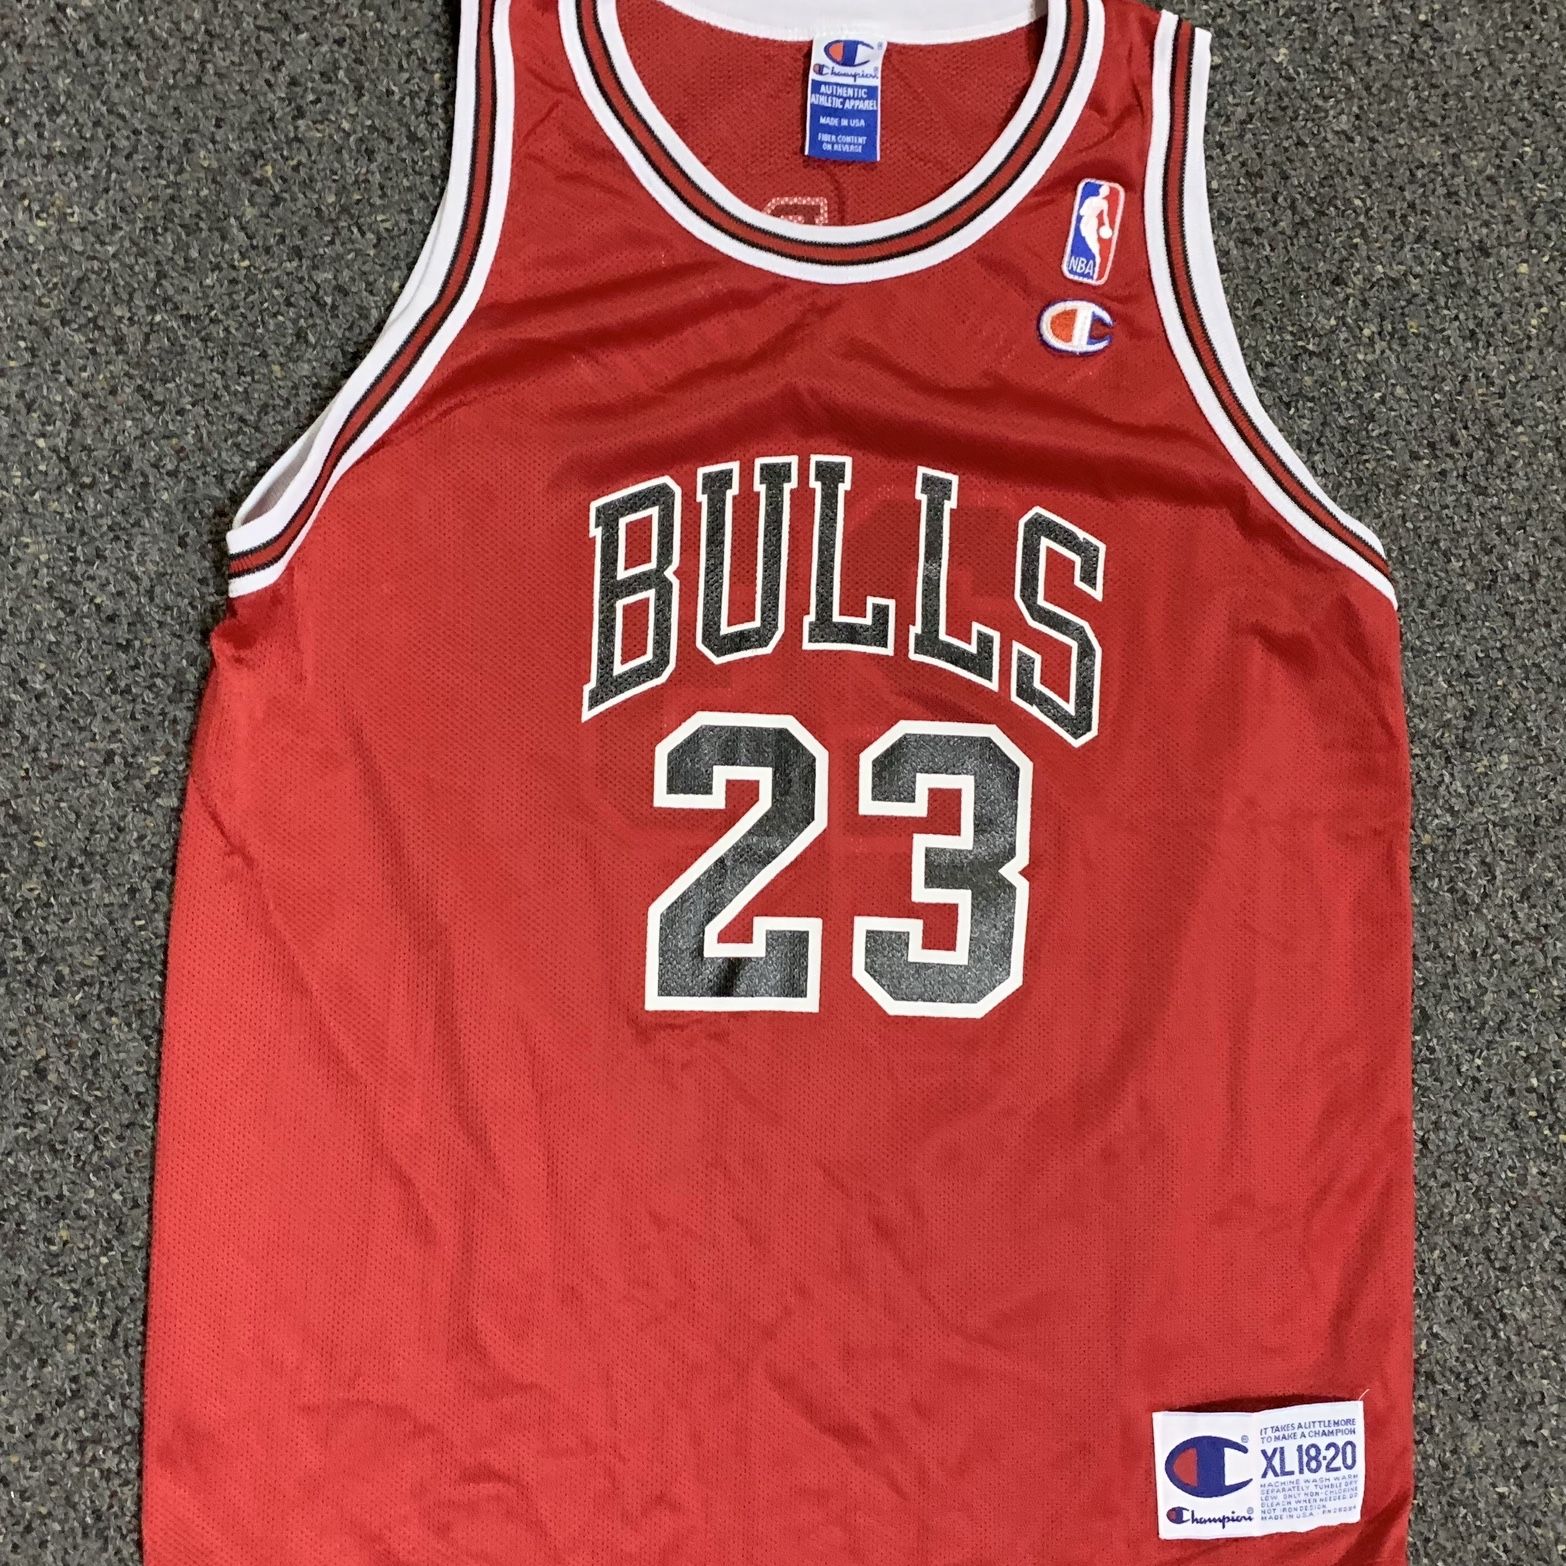 Bulls Basketball Jersey for Sale in Stickney, IL - OfferUp